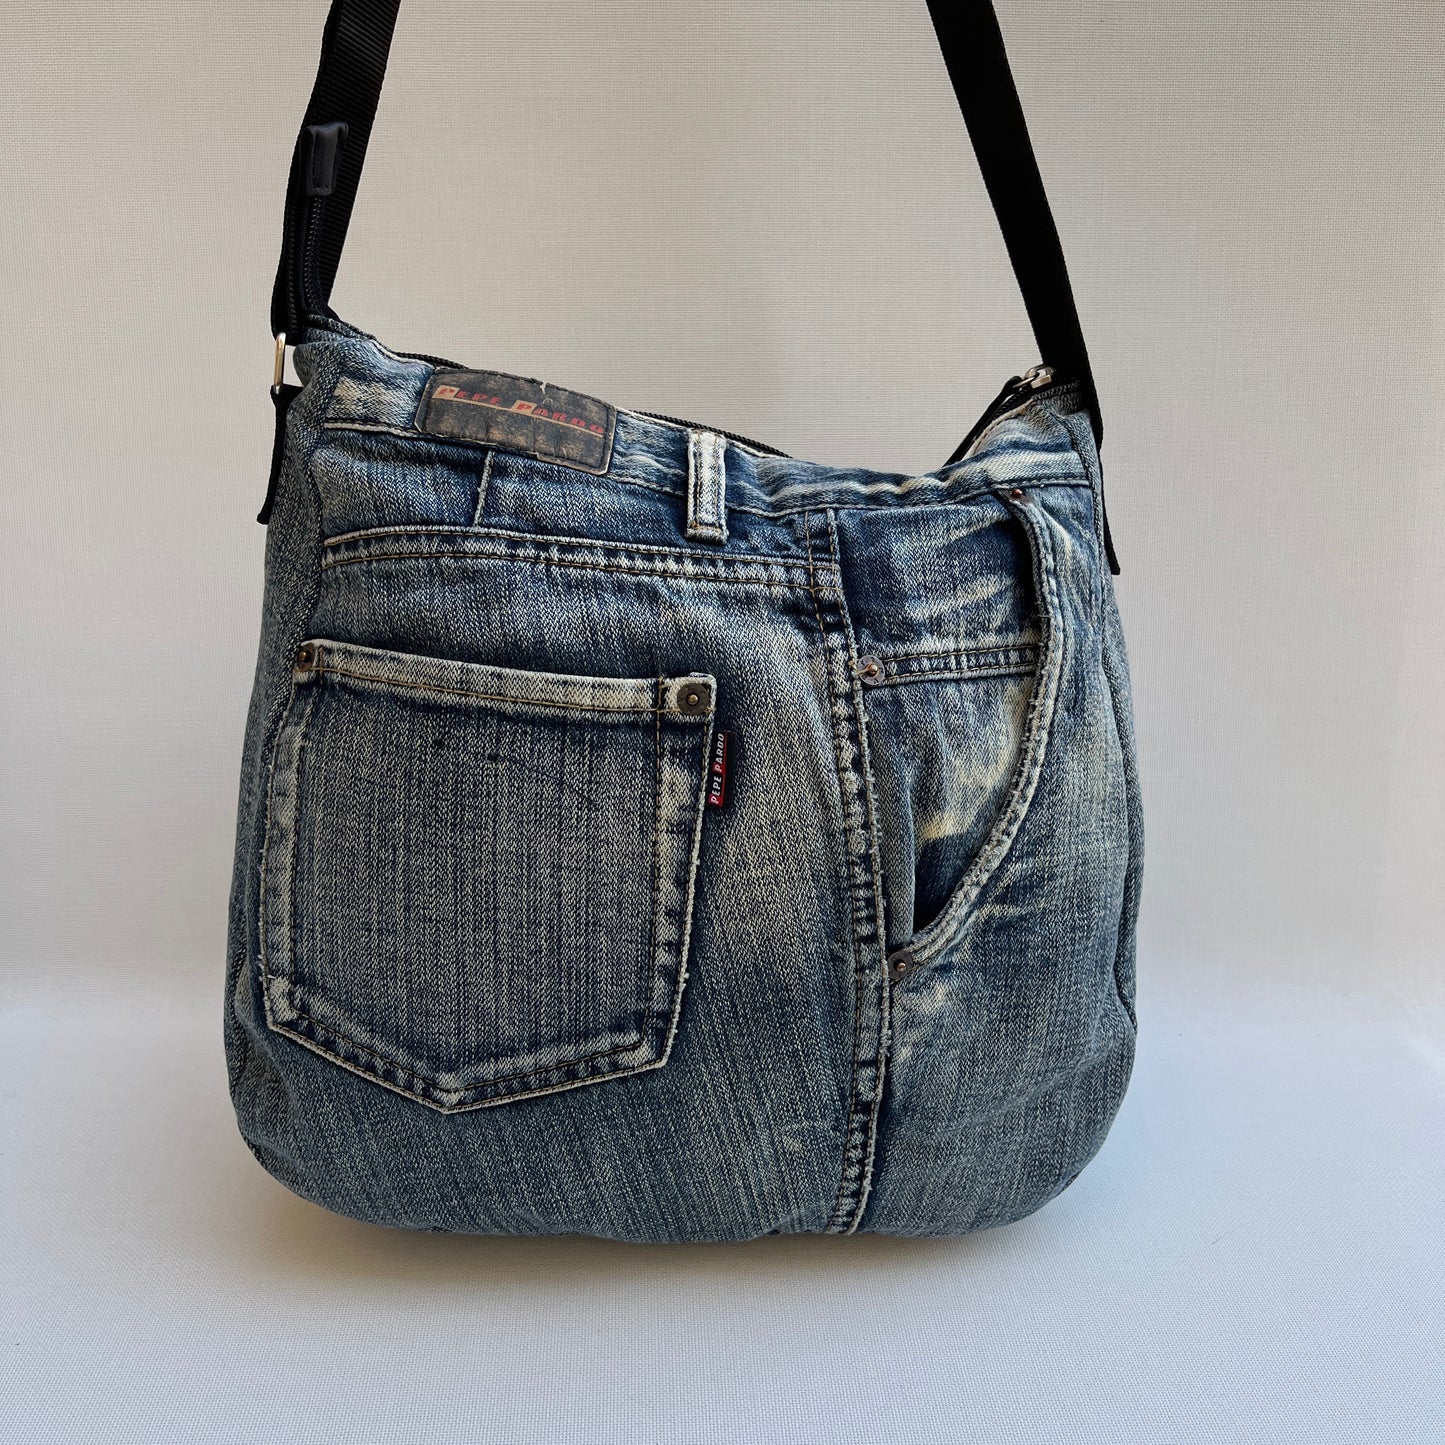 Caomka Tote Bag Special Edition ♻️ Jeans Recycled ♻️ Unikat 11923